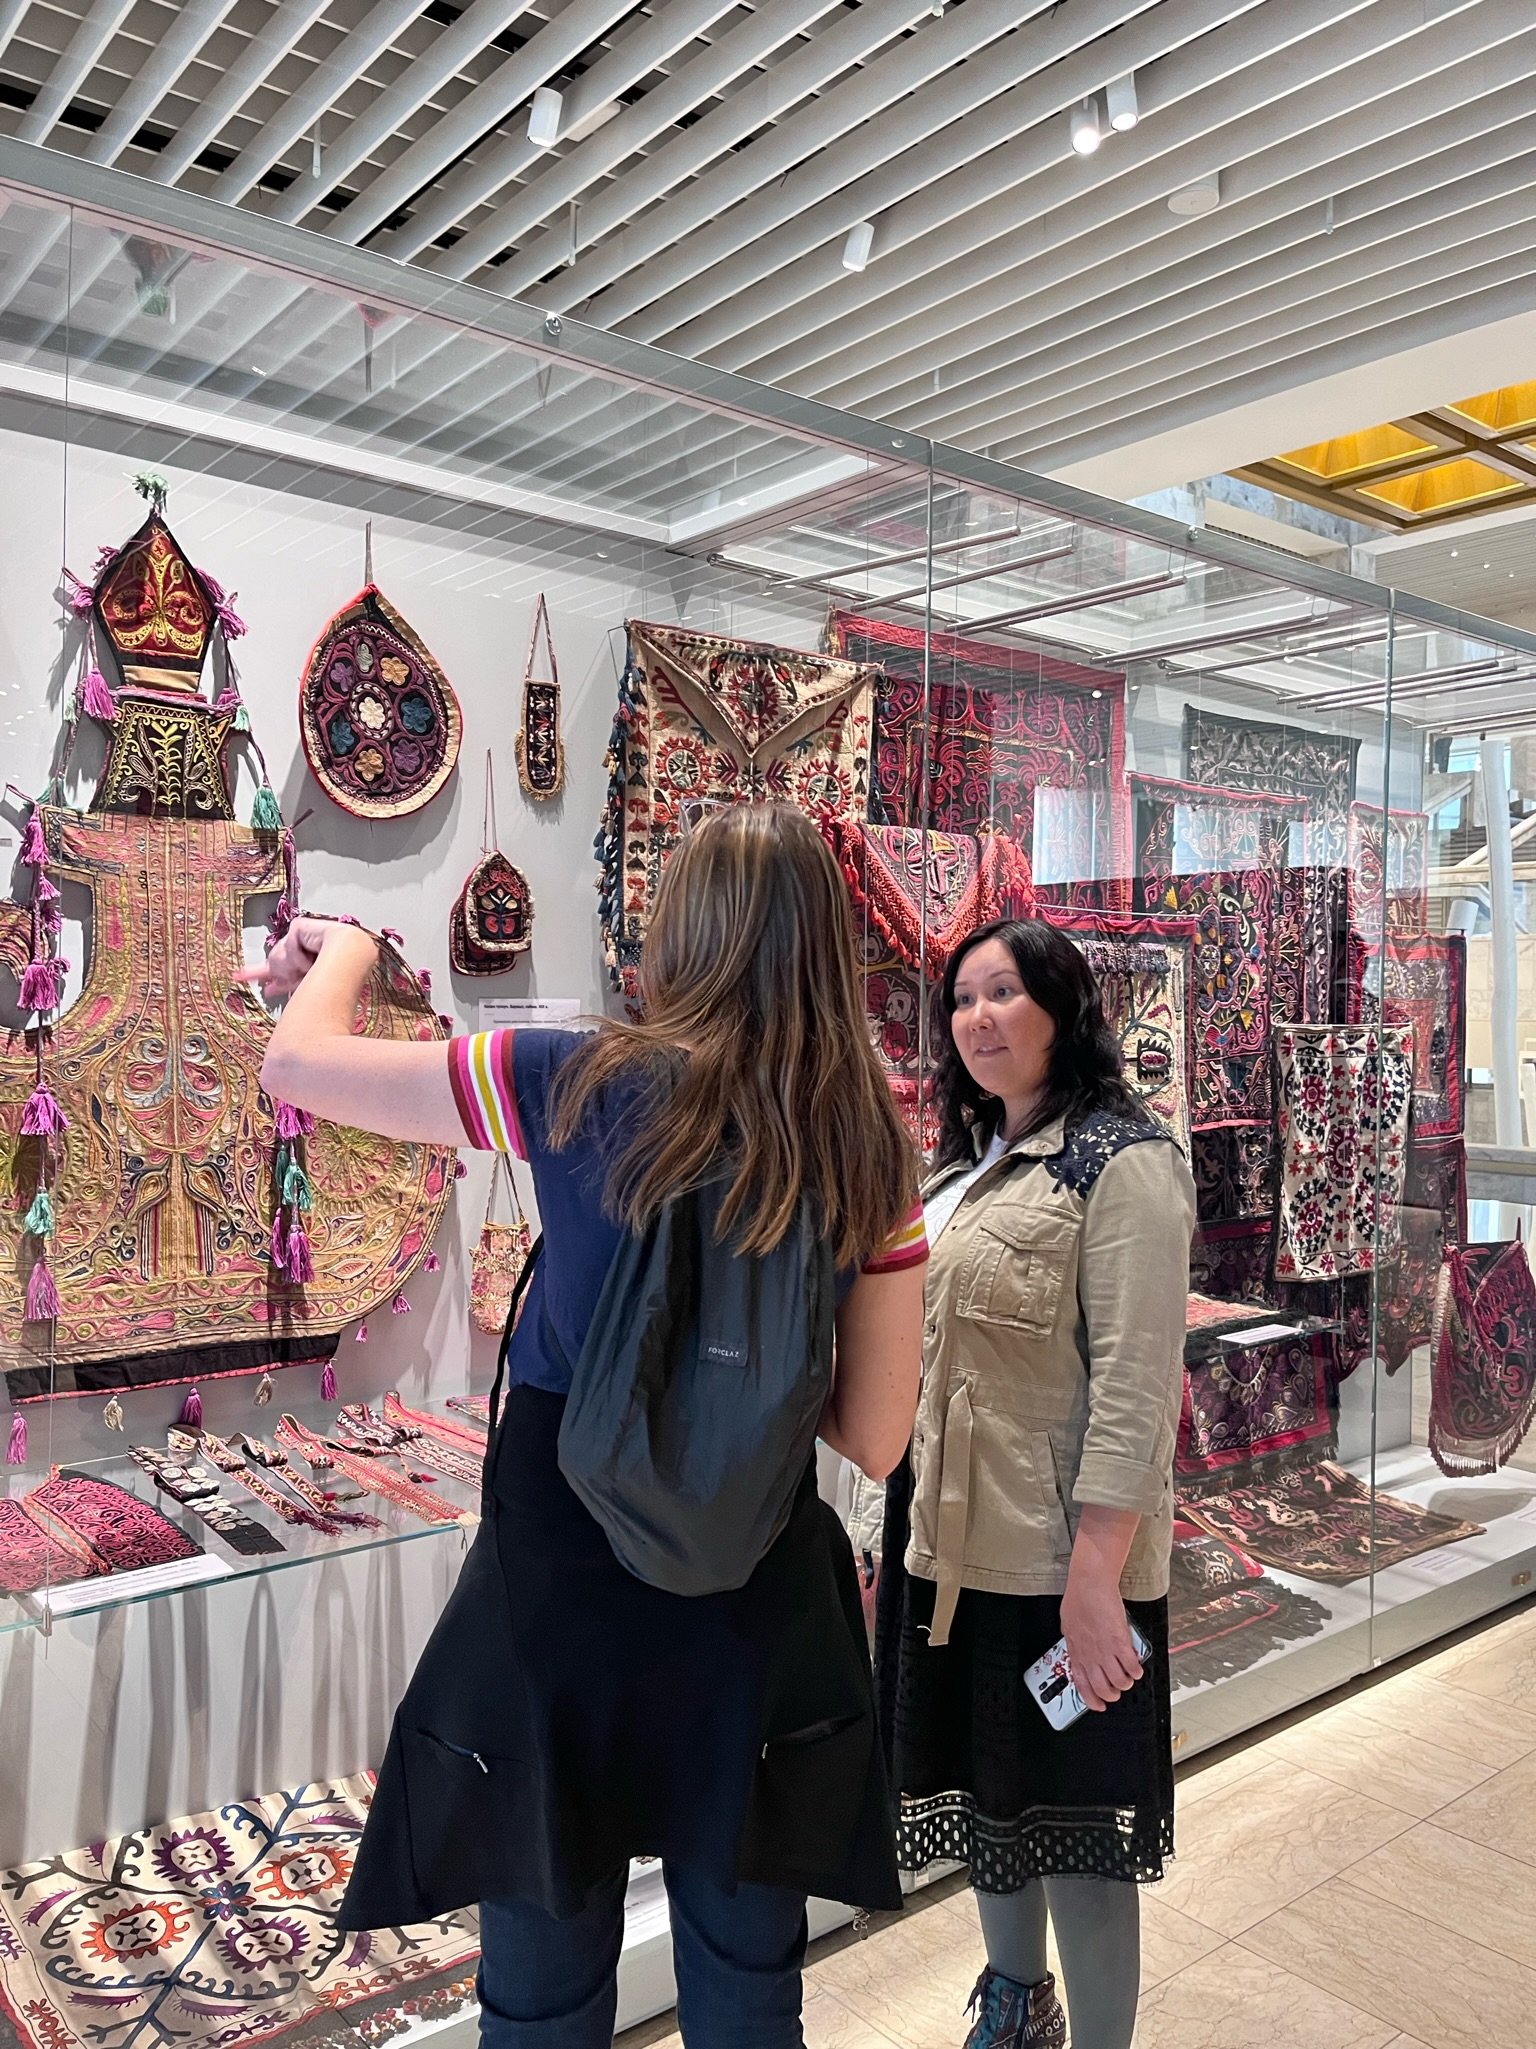   Looking at craft objects made by women on display at the State History Museum, Bishkek, Kyrgyzstan with Altynai Kudaibergenova.  